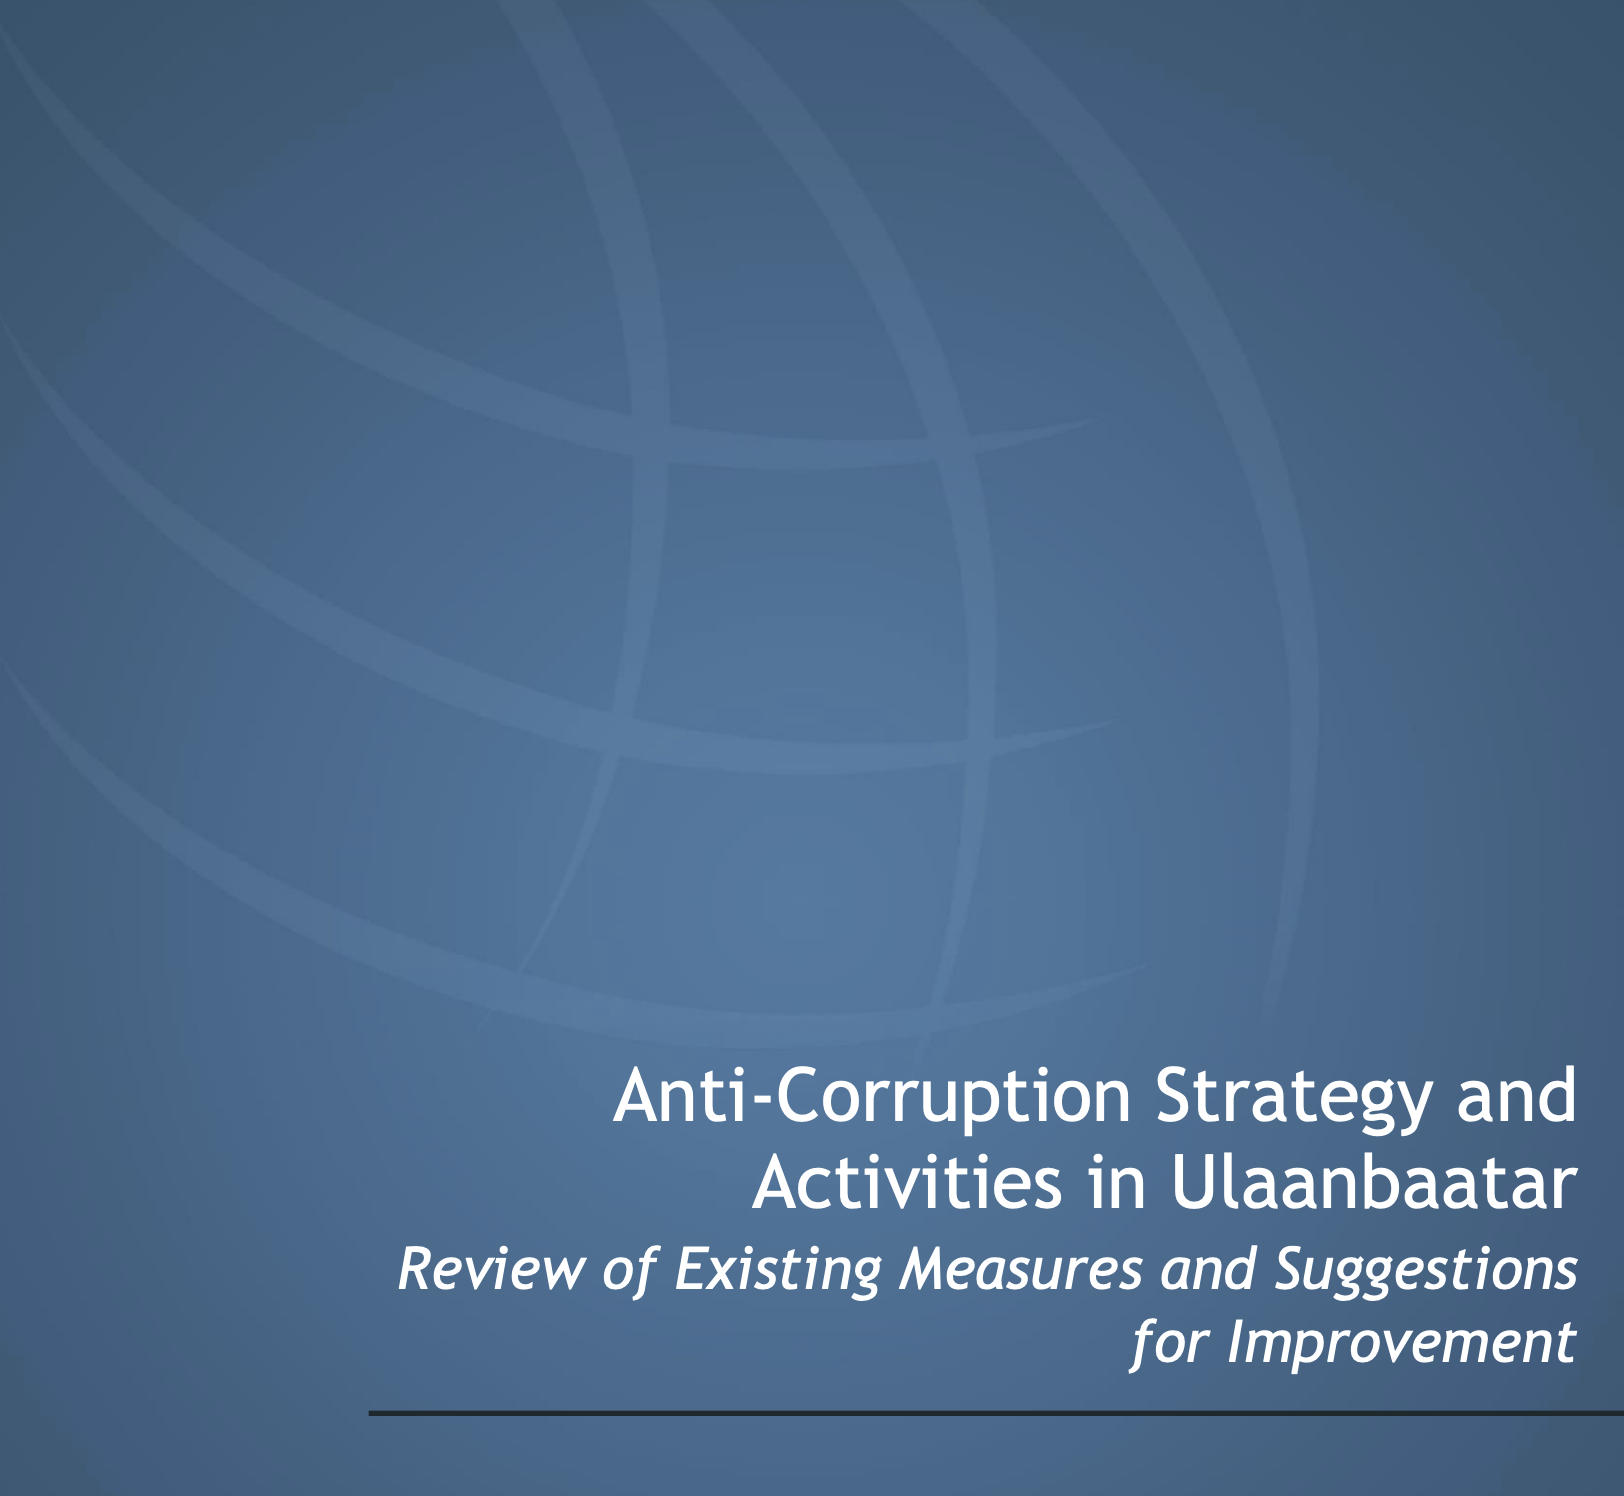 Anti-Corruption Strategy and Activities in Ulaanbaatar Review of Existing Measures and Suggestions for Improvement